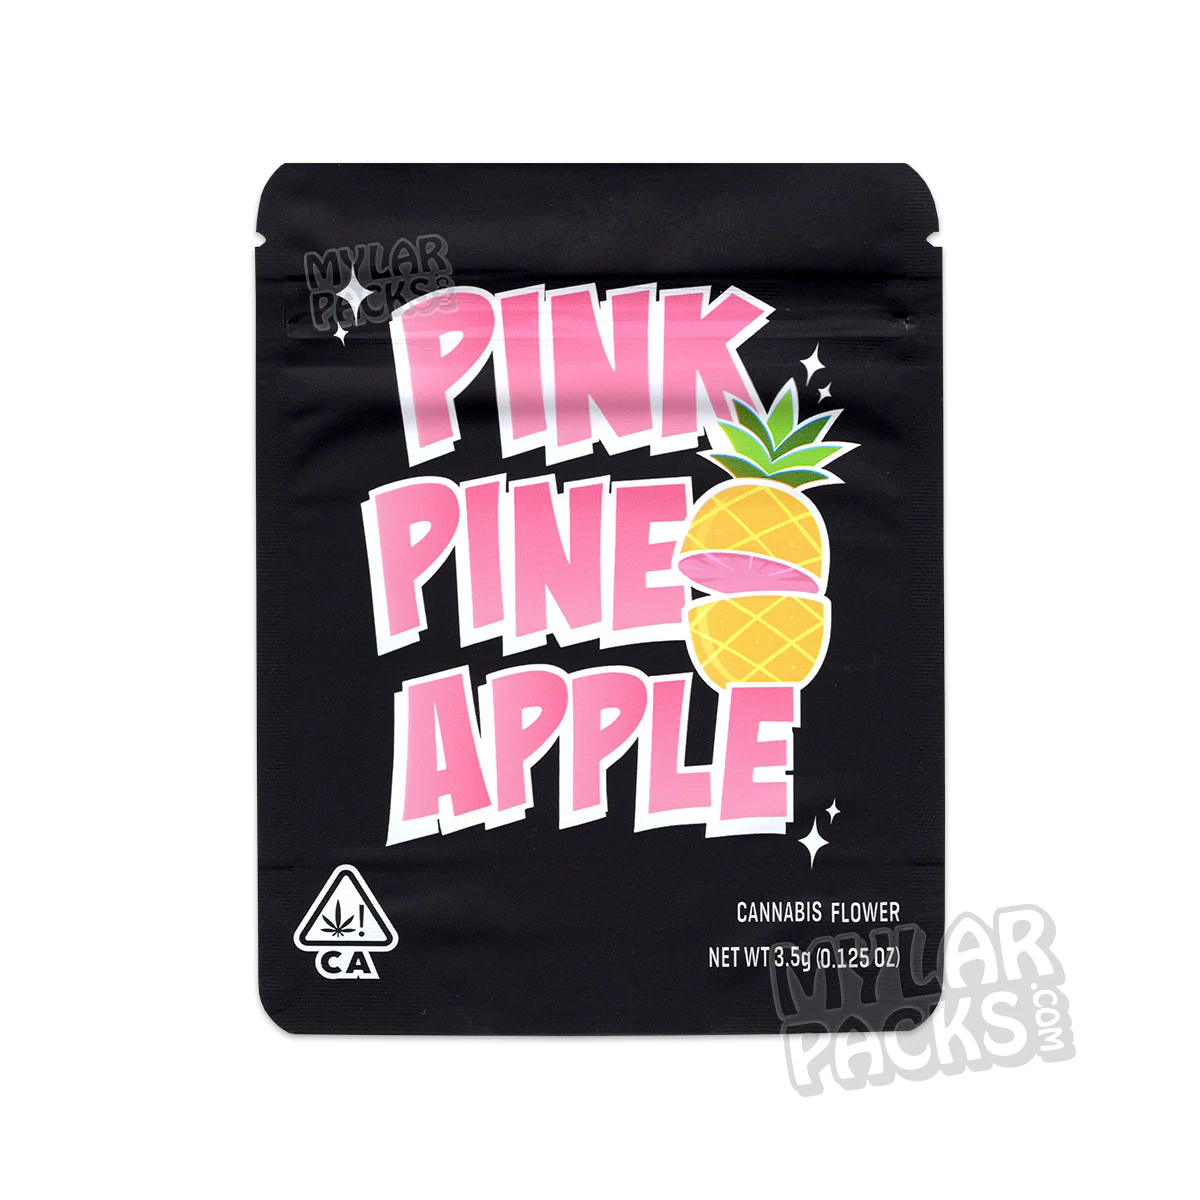 https://mylarpacks.com/wp-content/uploads/2021/12/products-cookies-pink-pineapple-01.jpg